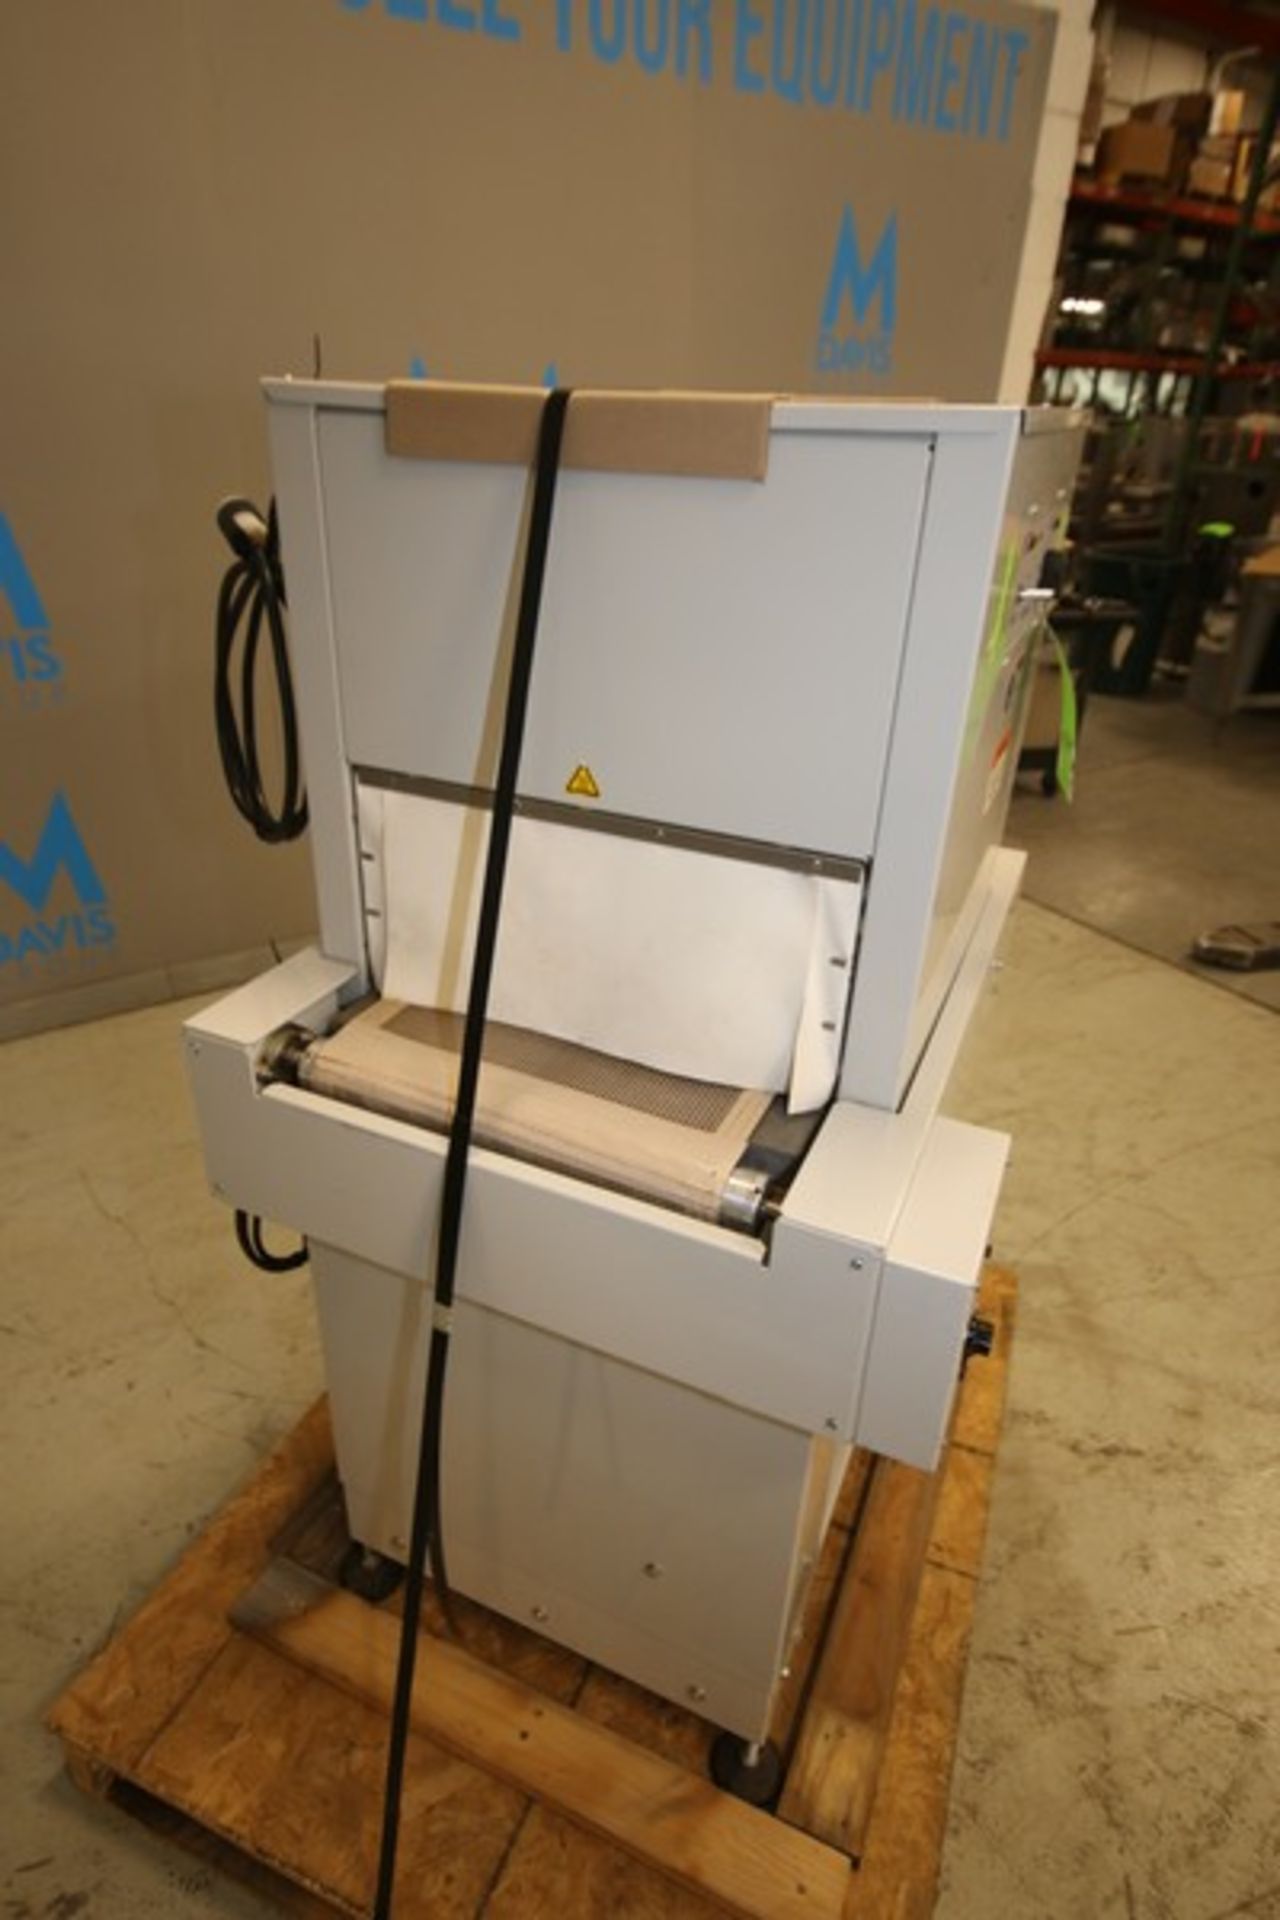 Clamco Portable Shrink Heat Tunnel, Type 820 Tunnel, PN 944-000028, SN 95768, 20" L x 33" H, with - Image 4 of 6